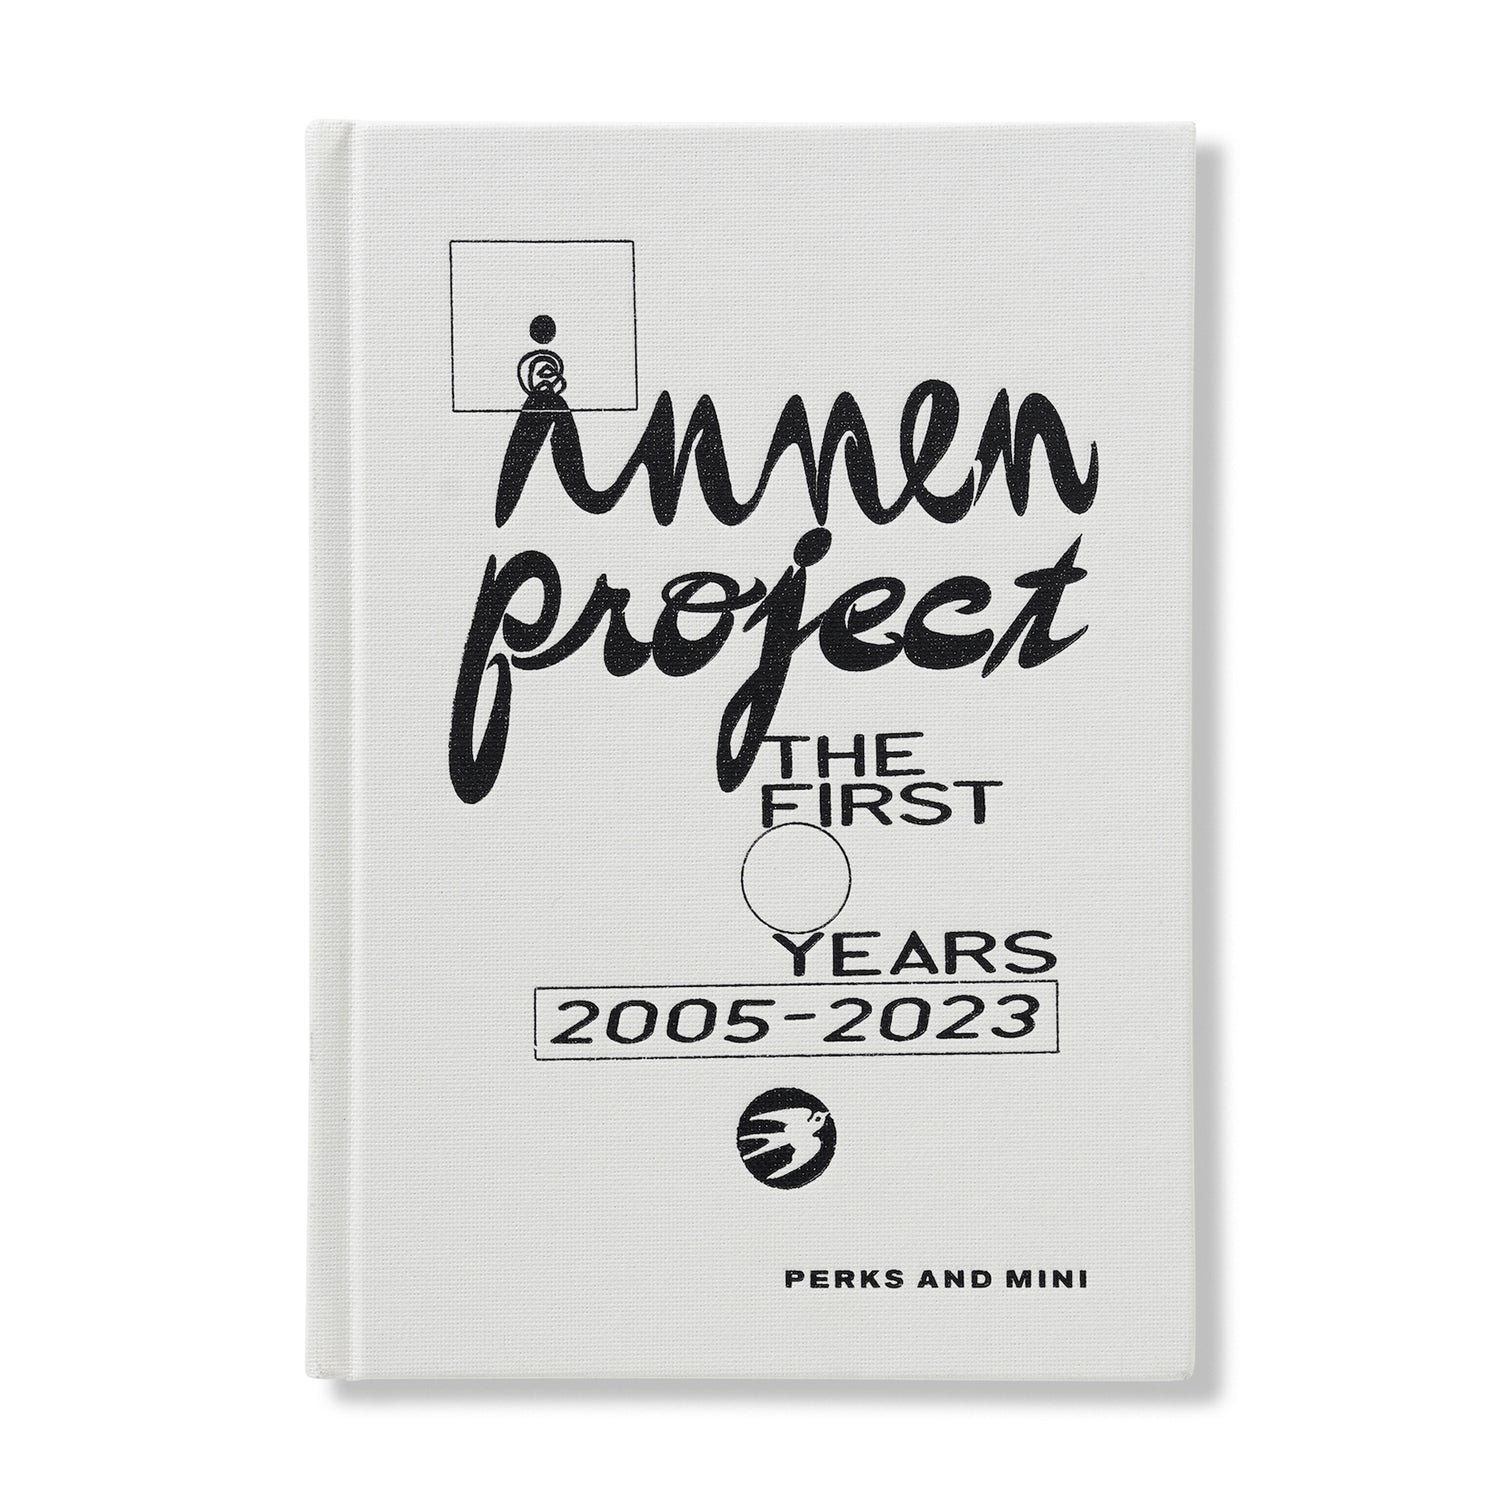 Innen Project 'The First Years'